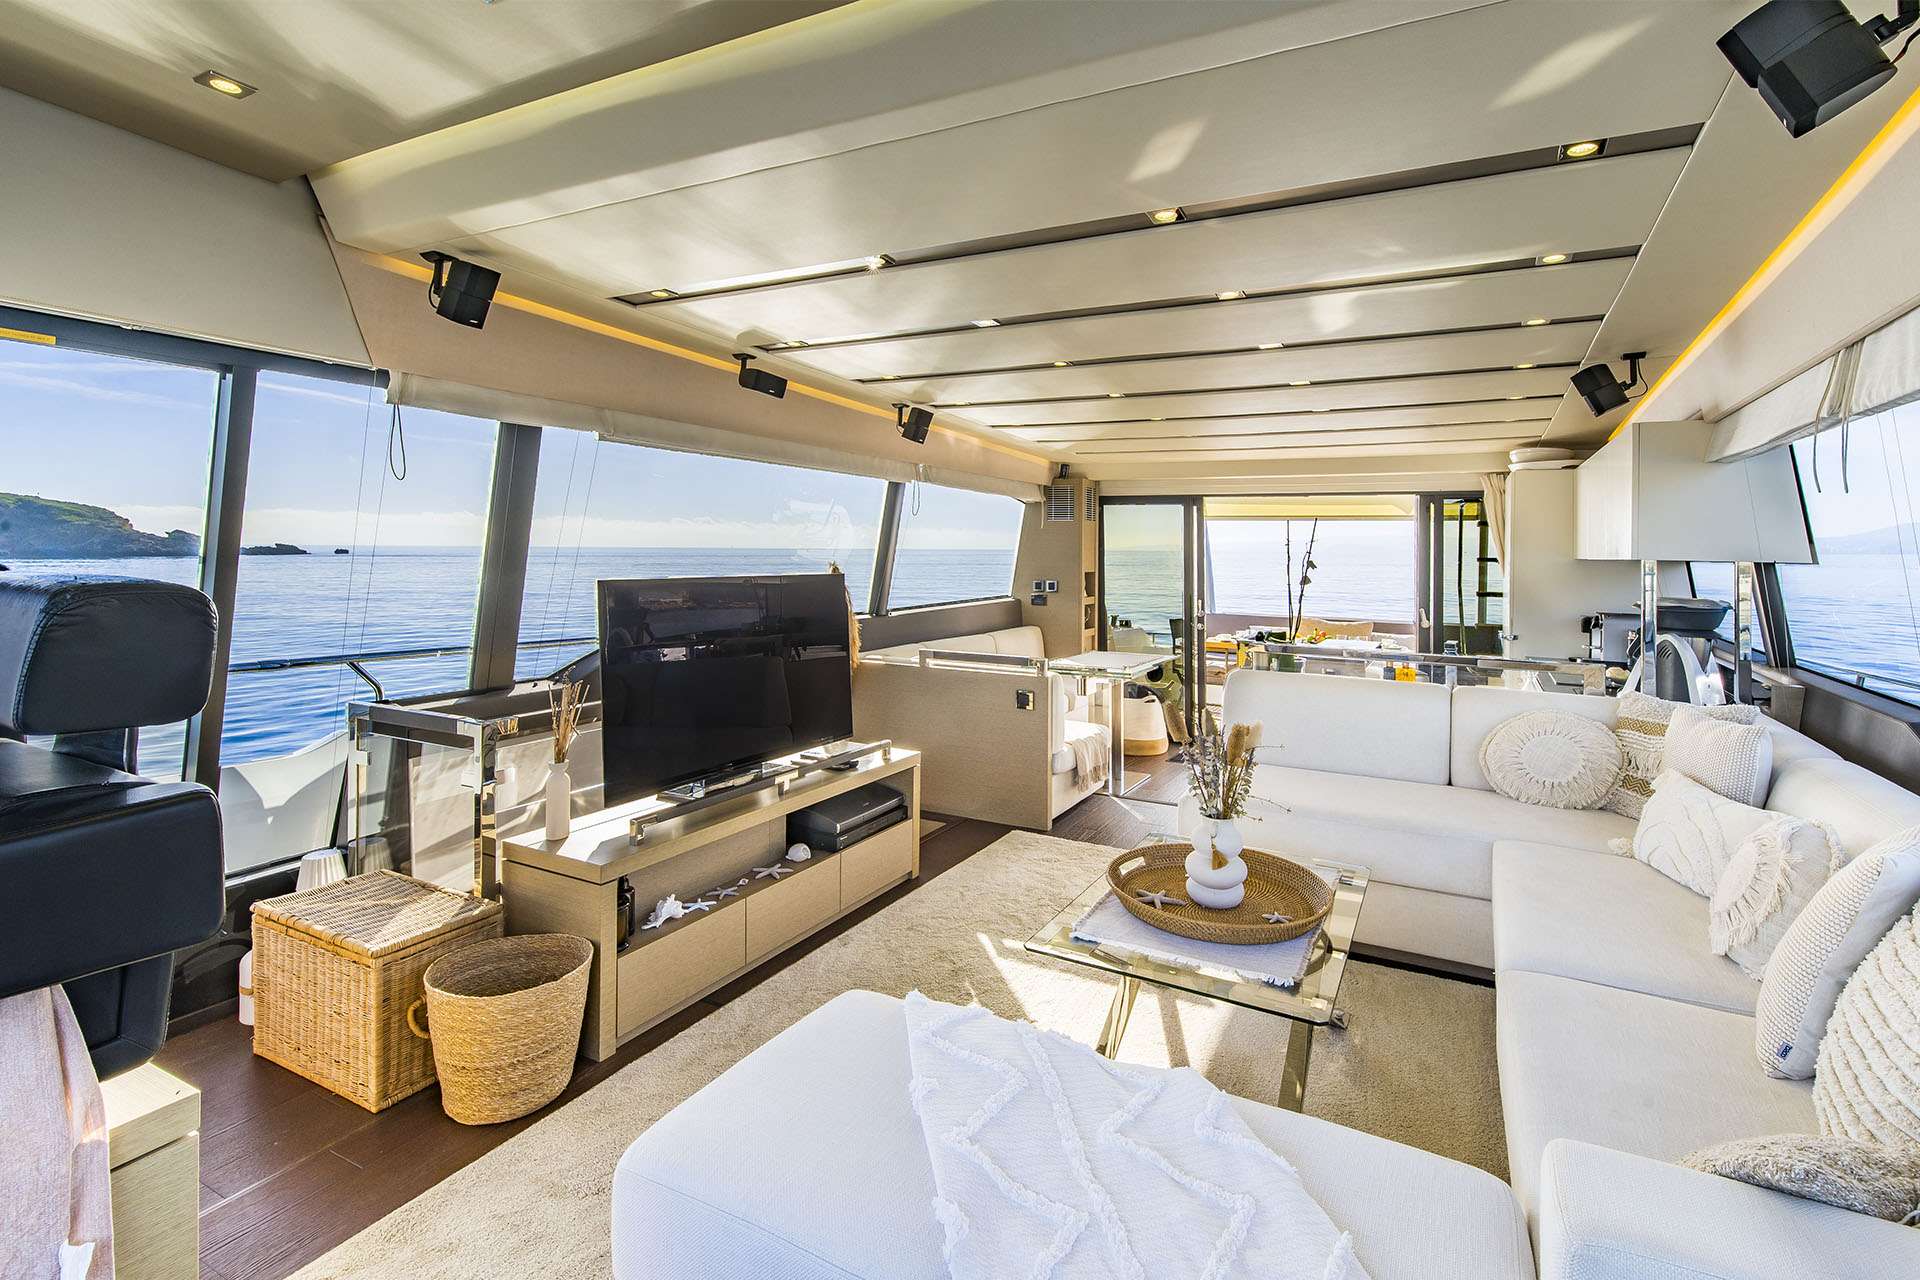 BLUE M - Yacht Charter Cala D`Or & Boat hire in W. Med -Naples/Sicily, W. Med -Riviera/Cors/Sard., W. Med - Spain/Balearics | Winter: Caribbean Virgin Islands (US/BVI), Caribbean Leewards, Caribbean Windwards 2